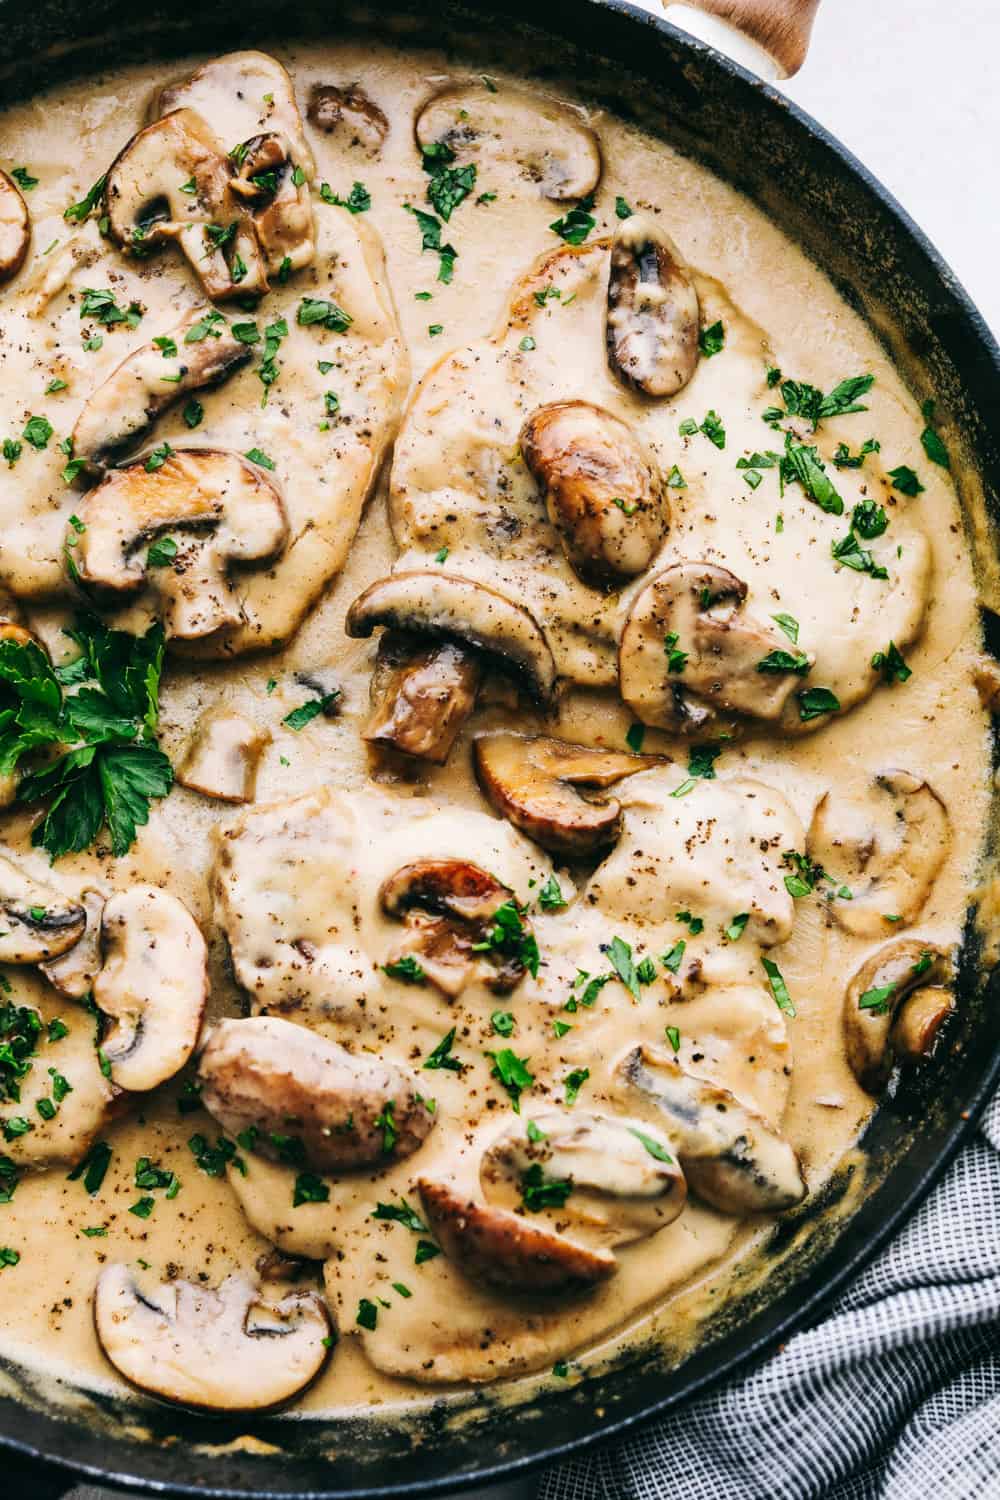 How T9 Cook Pork Chops In Cream Of Mushroom Soup In Electric Skillet